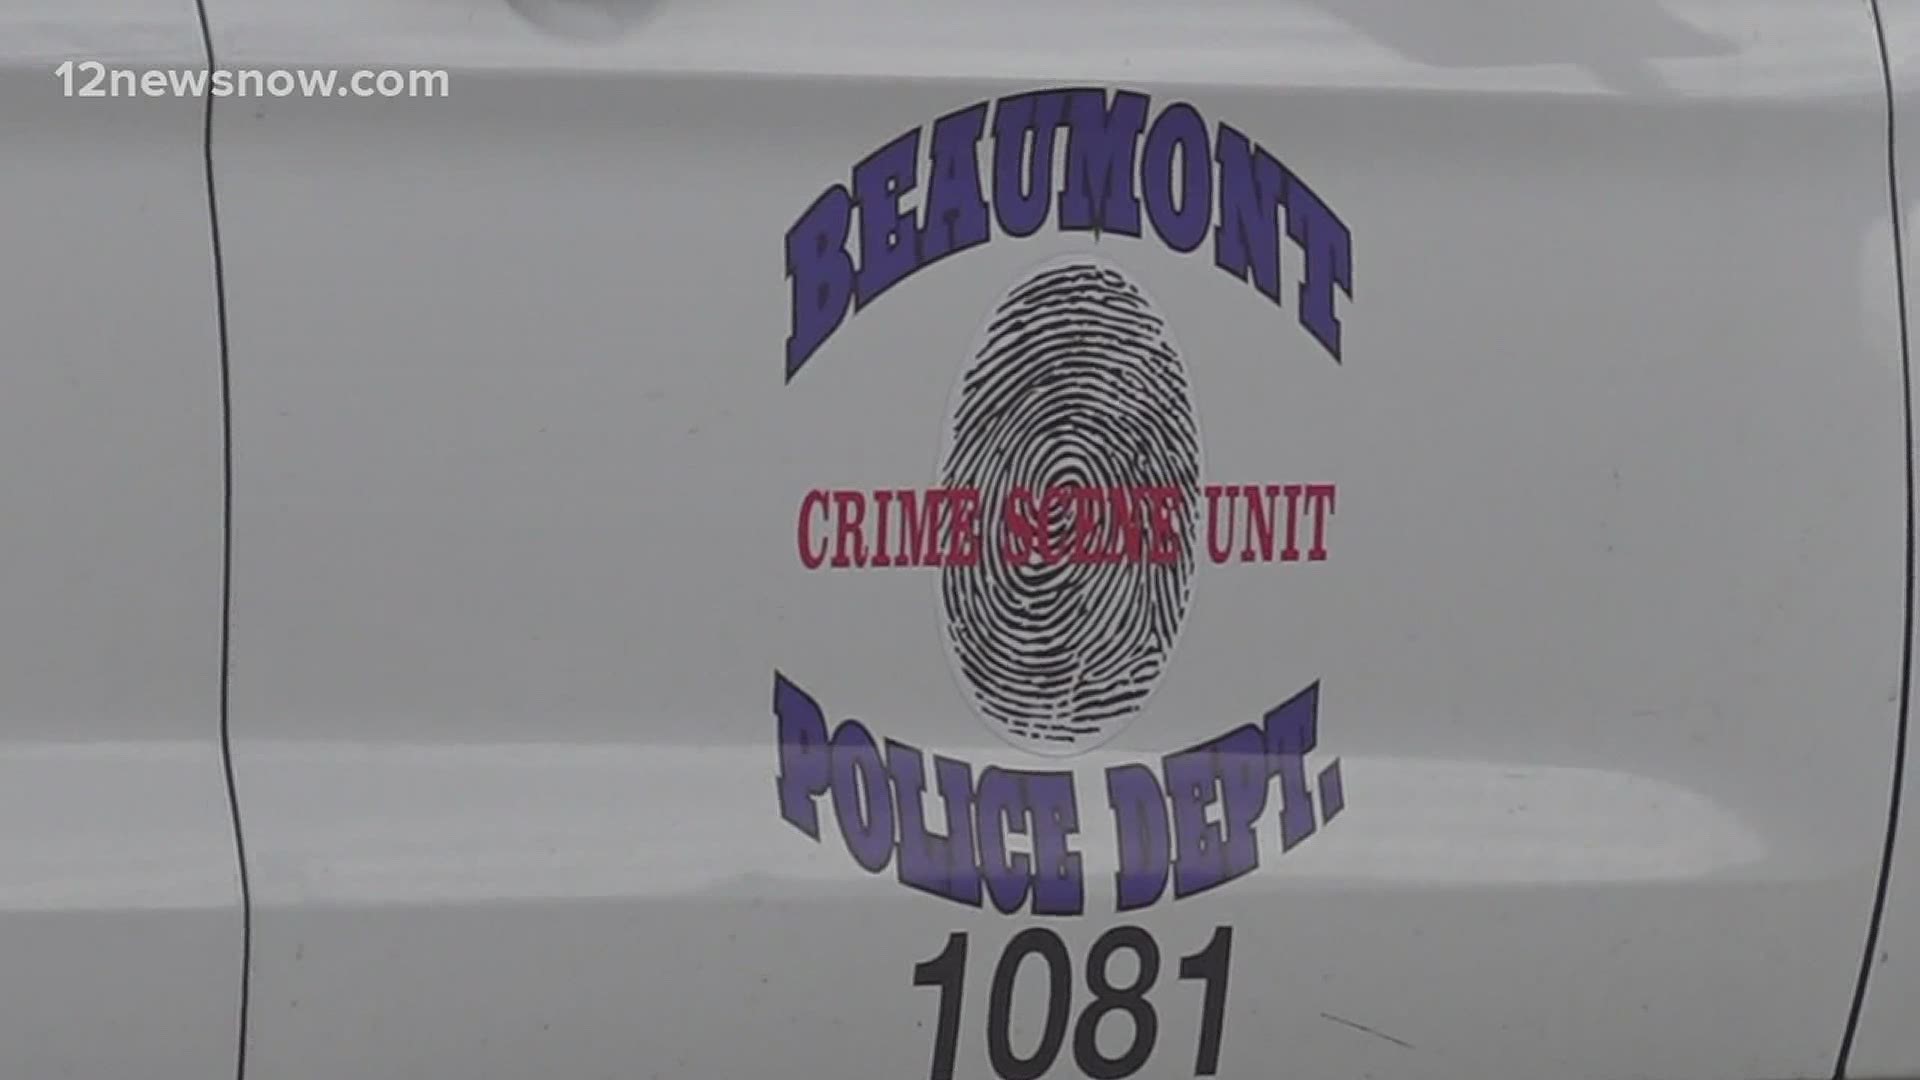 The death is one of many domestic deaths in Beaumont, police say.